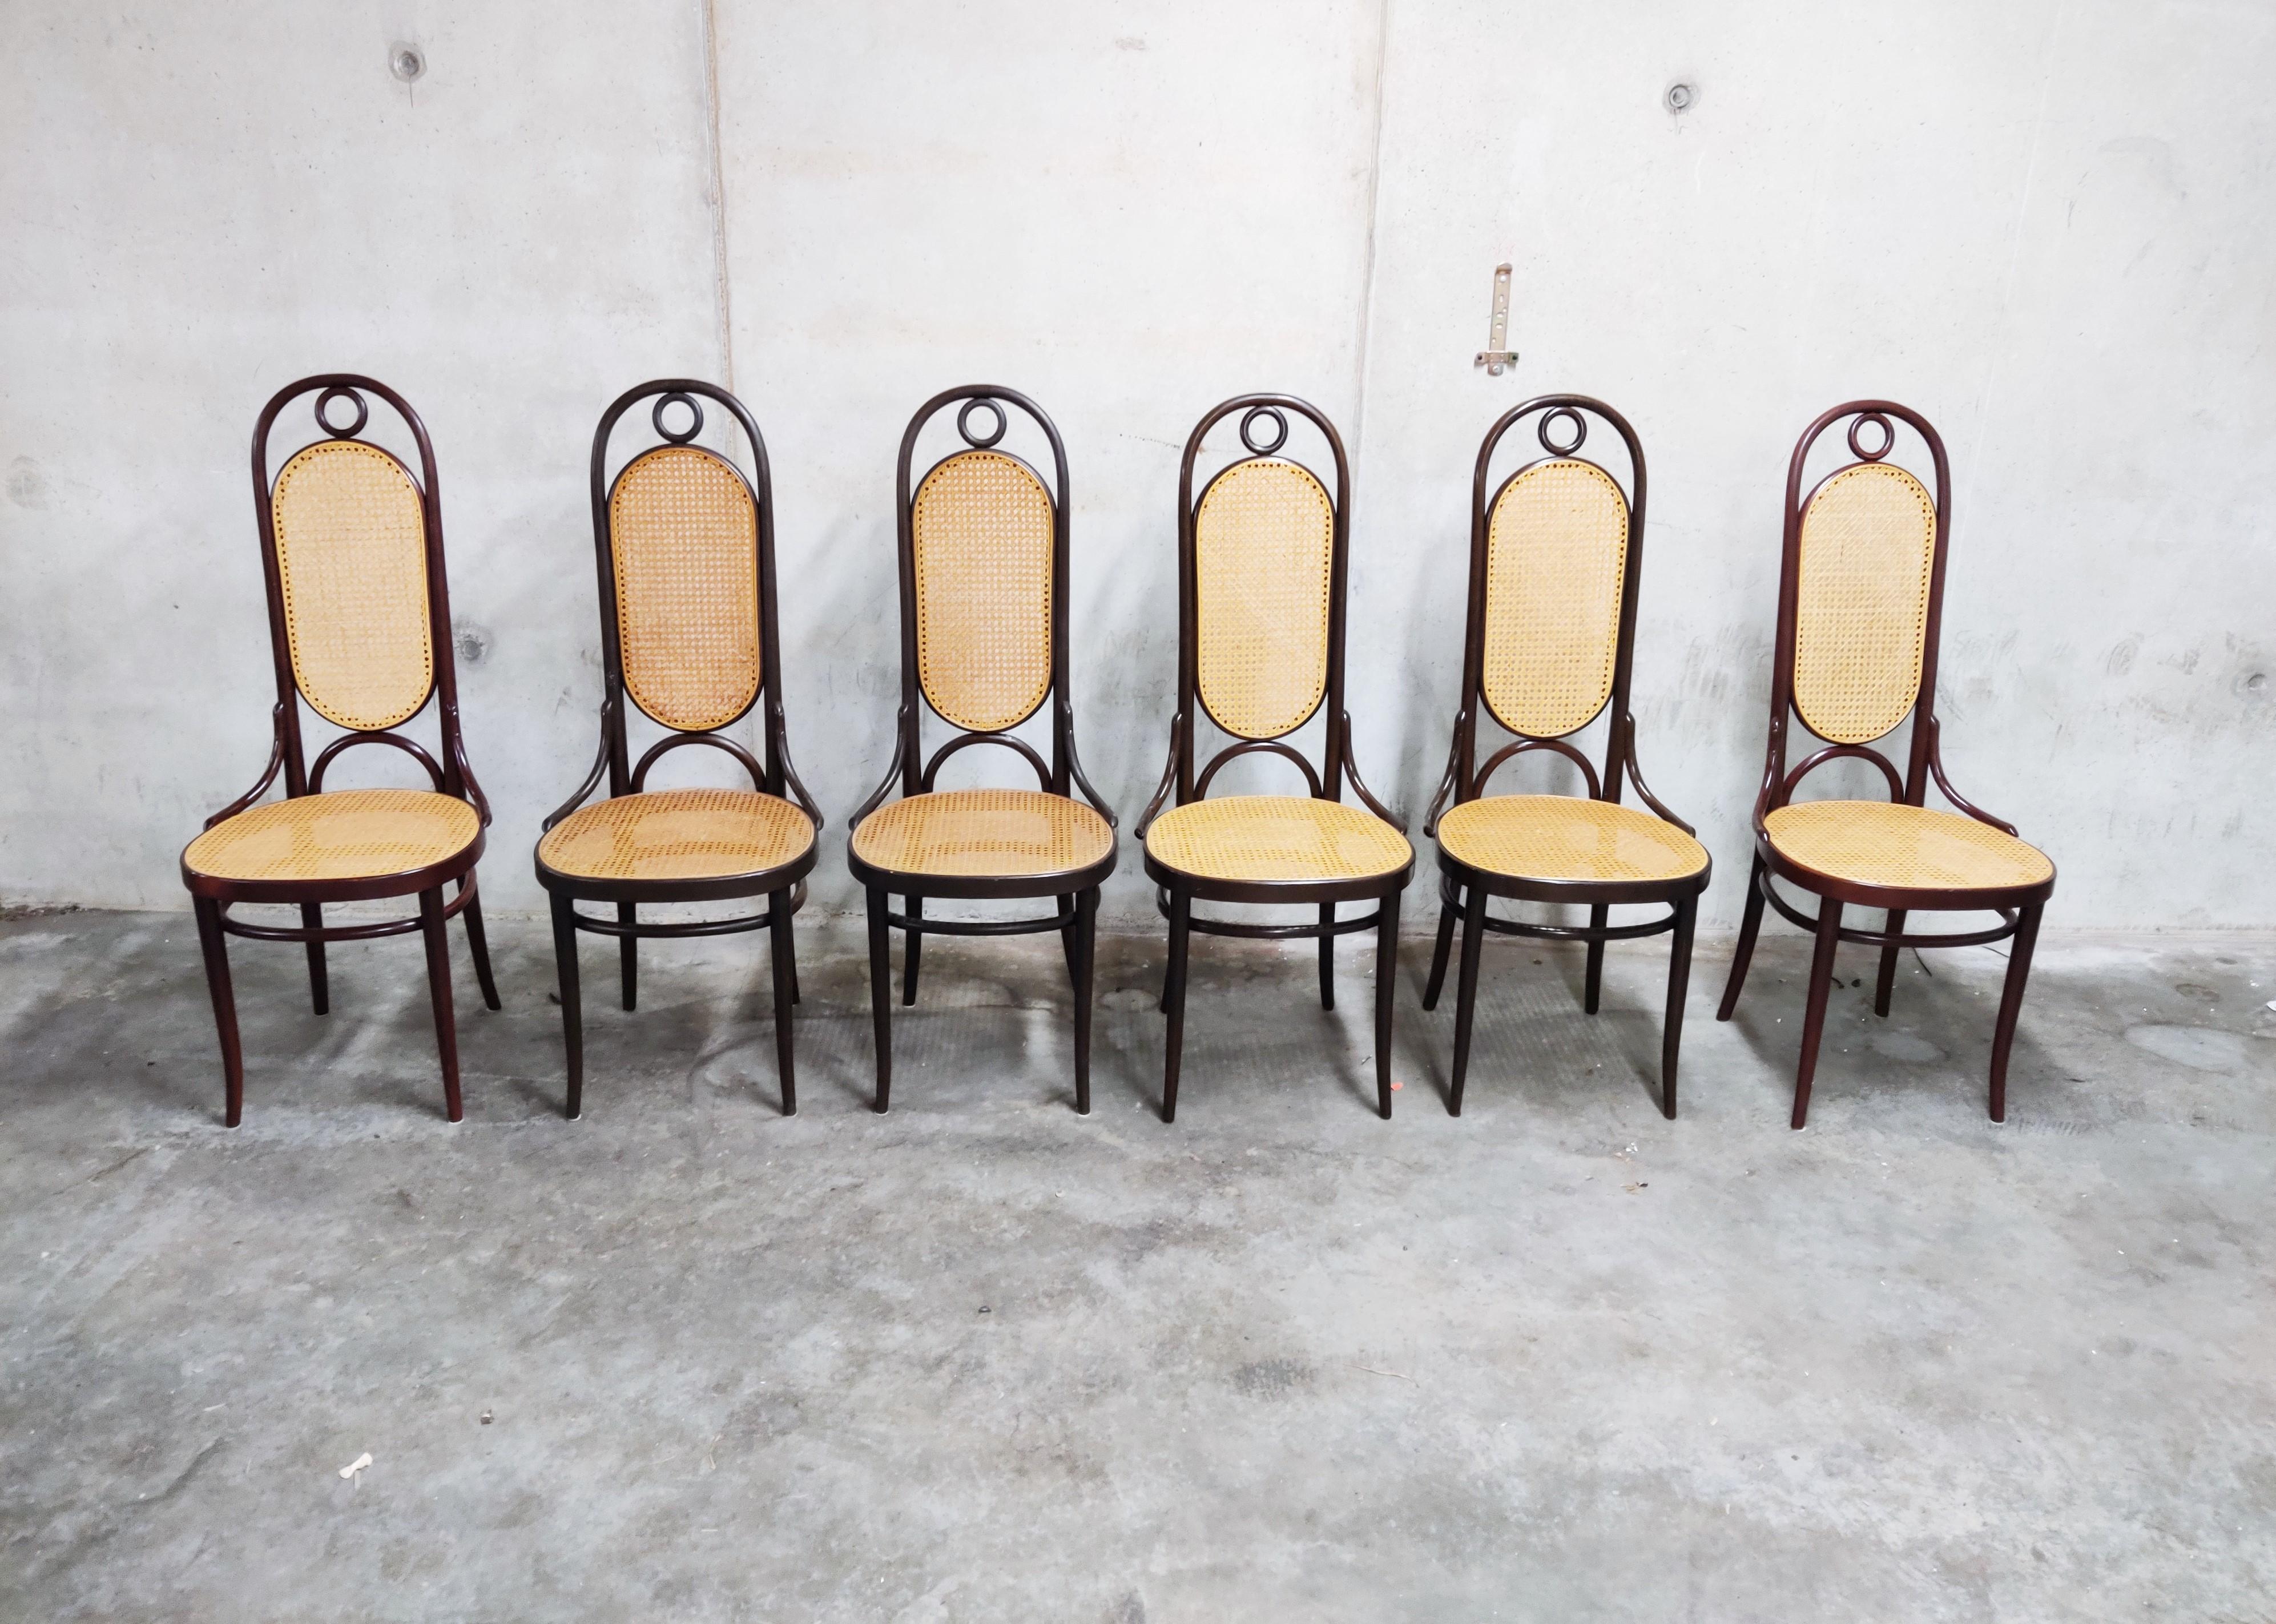 Set of 6 brown Thonet no. 17 high back dining chairs.

The cane seats are in good condition.

Beautiful bentwood frames.

Two chairs have a slightly different color compared to the 4 other chairs, but they create a lovely set together,